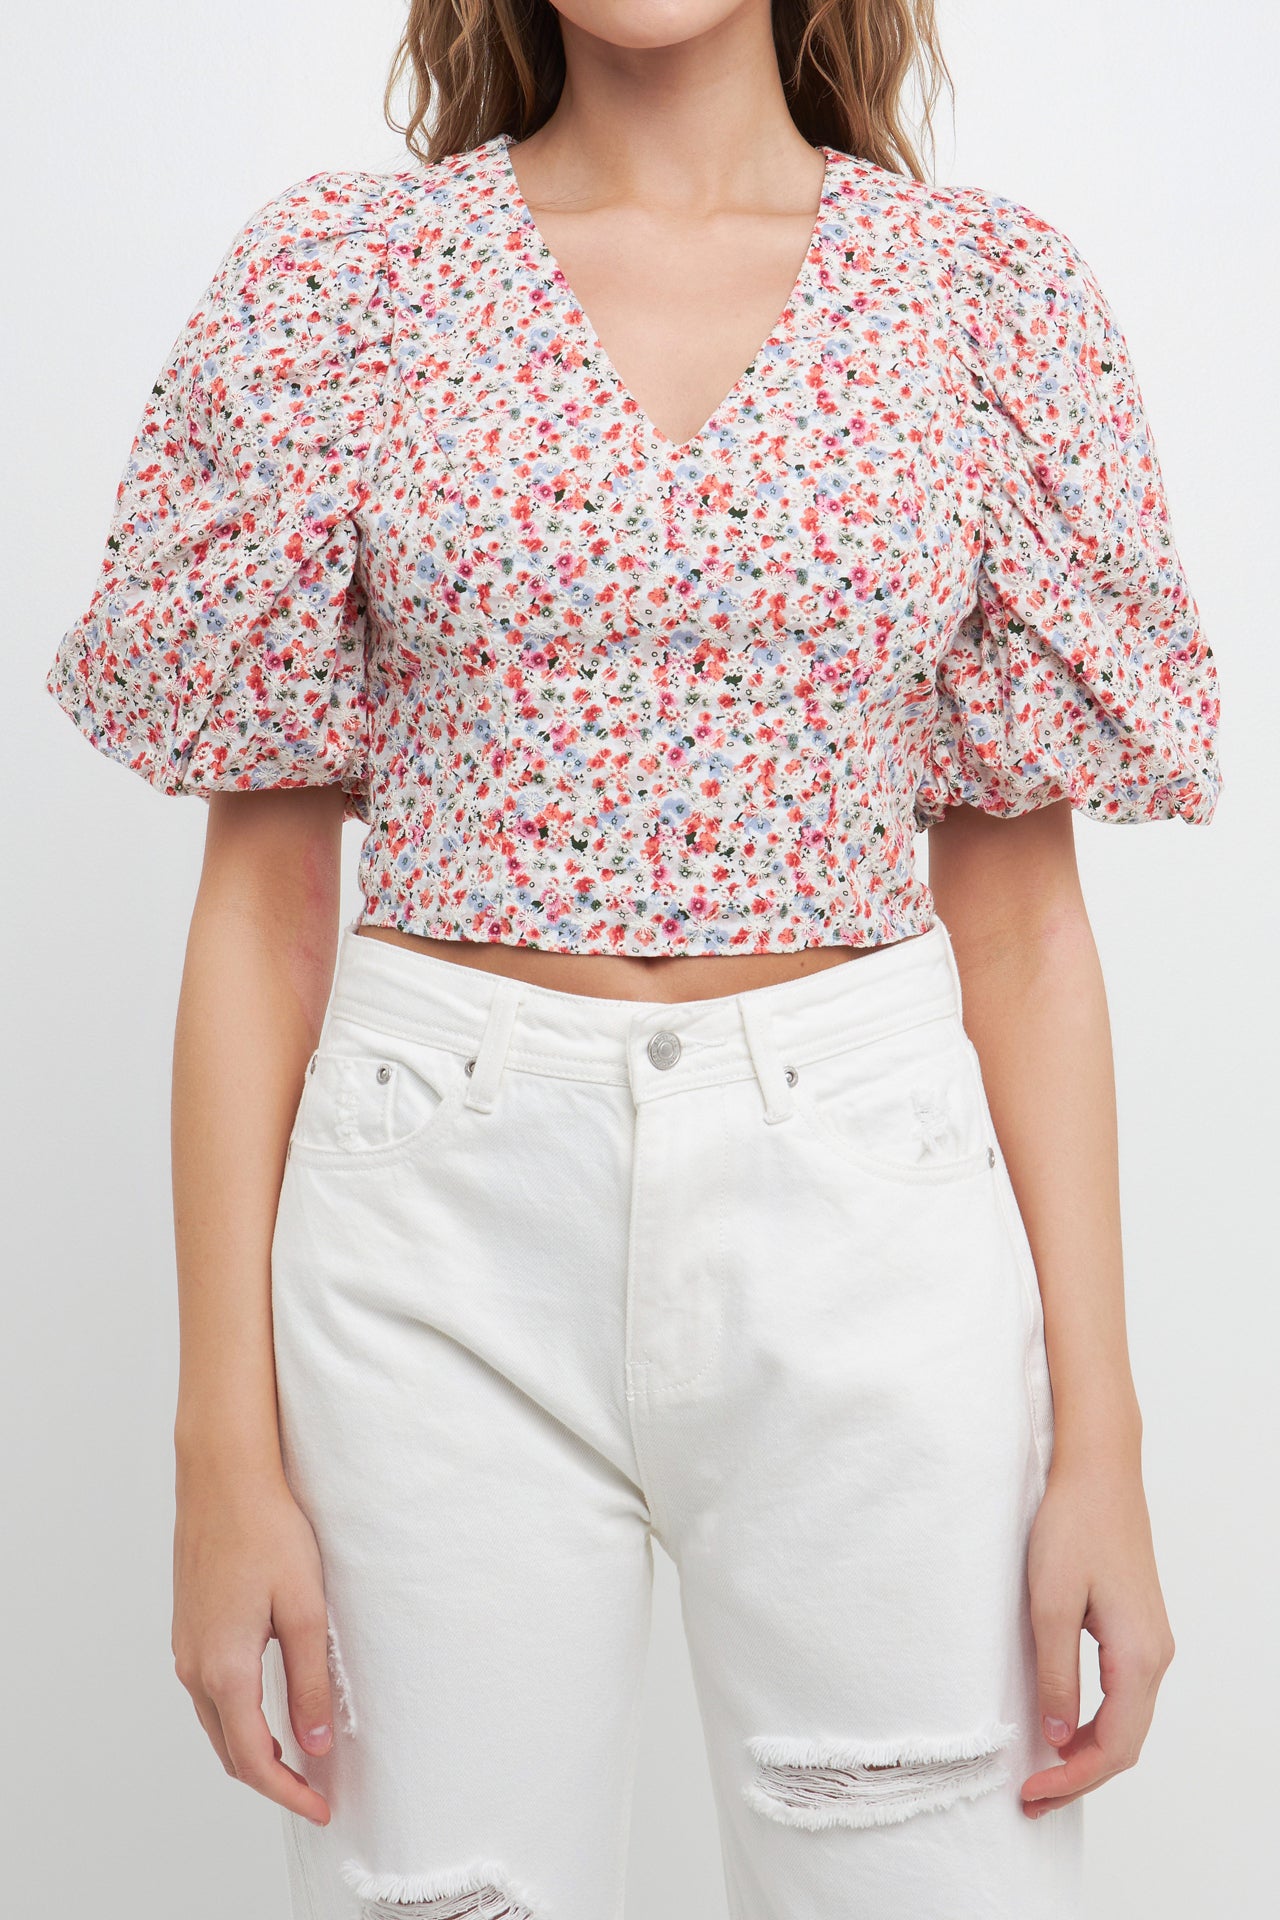 FREE THE ROSES - Embroidered Floral Mixed Puff Sleeve Top - TOPS available at Objectrare